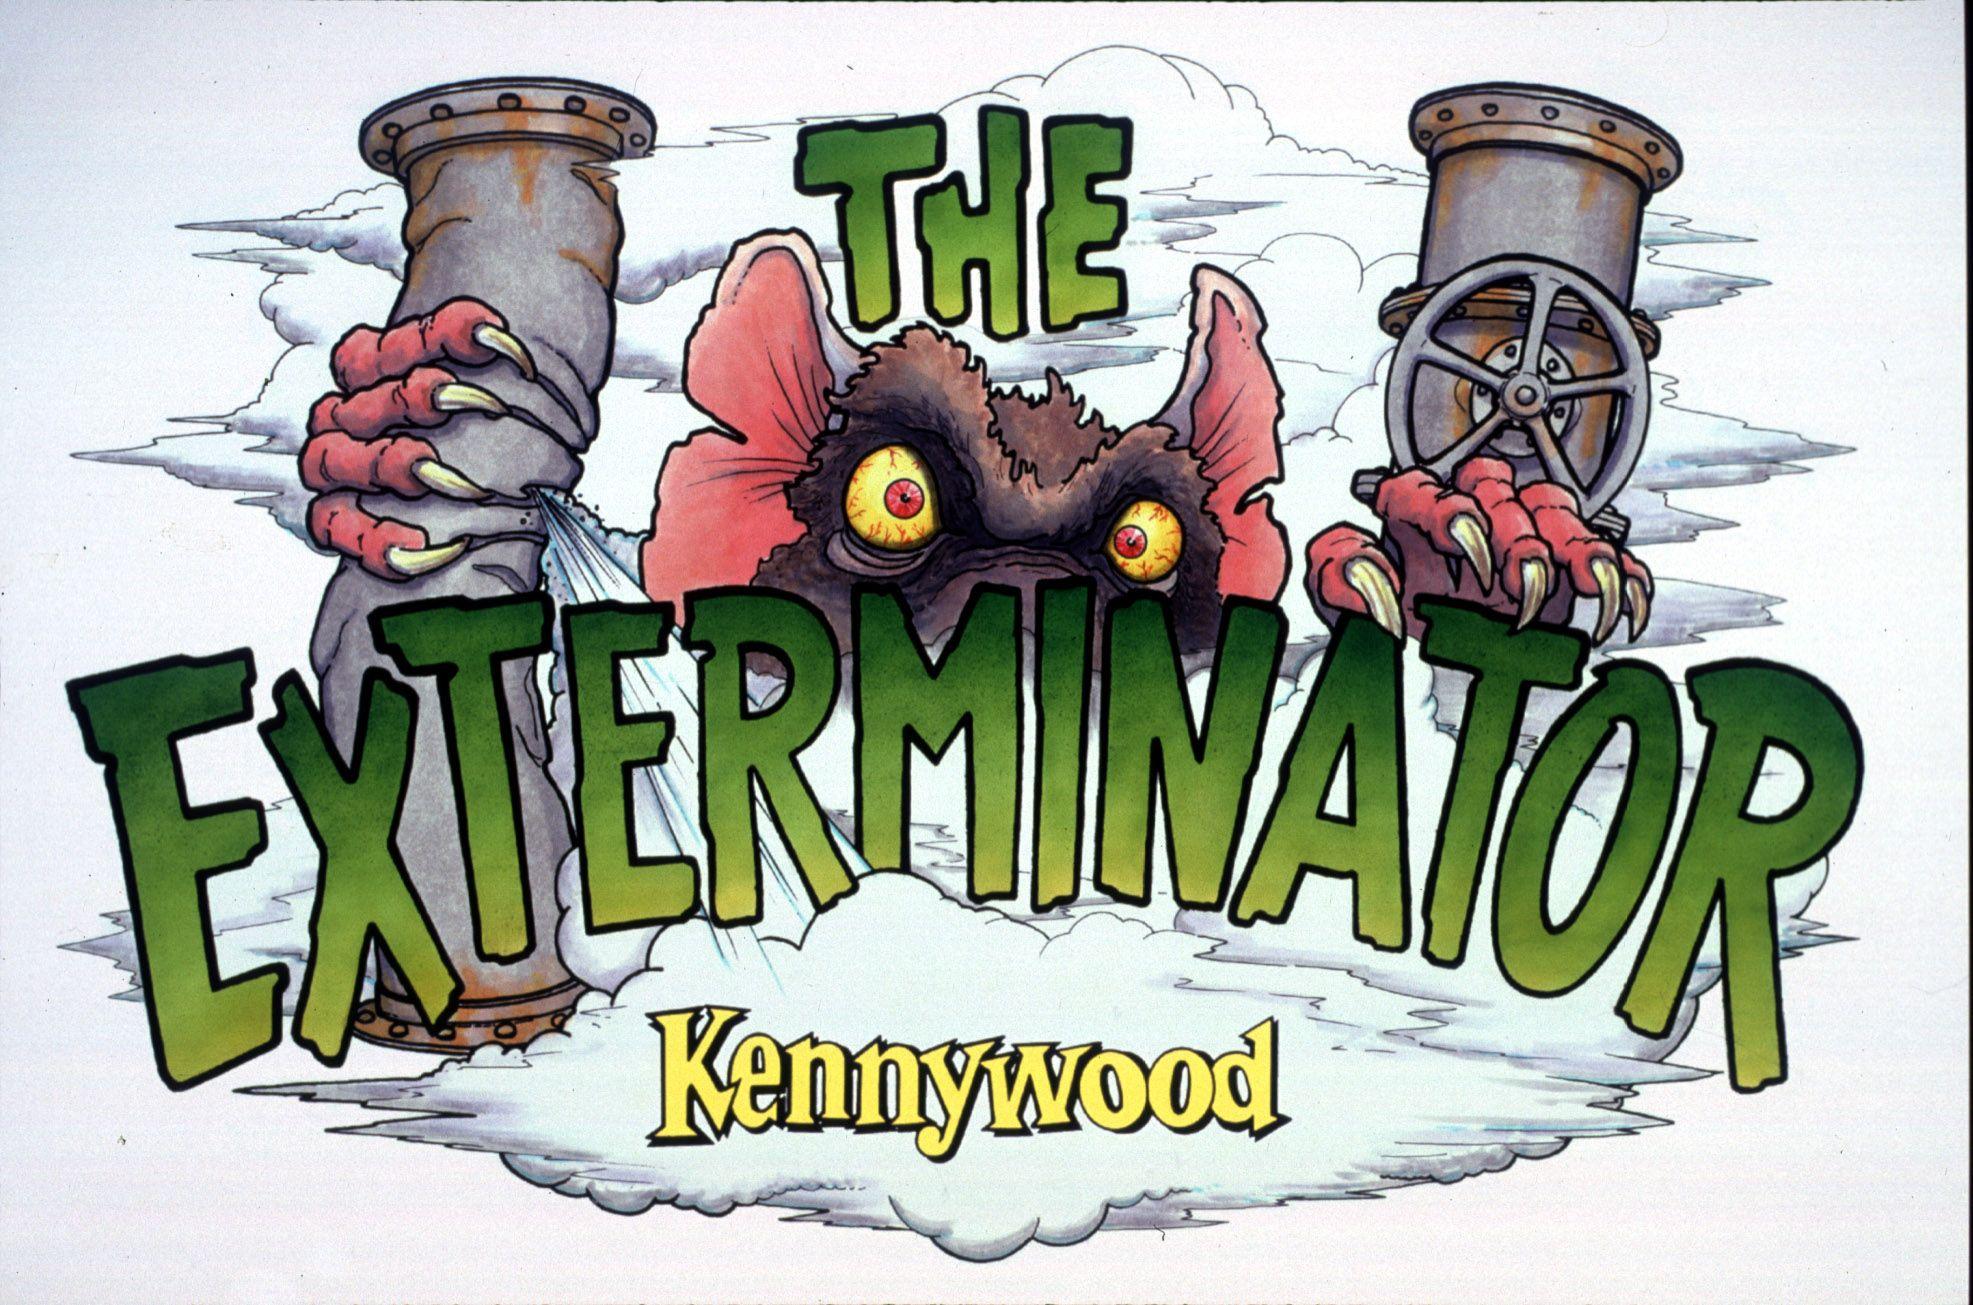 Kennywood Logo - Kenny Kangaroo to Share a Birthday Party with The Exterminator and ...